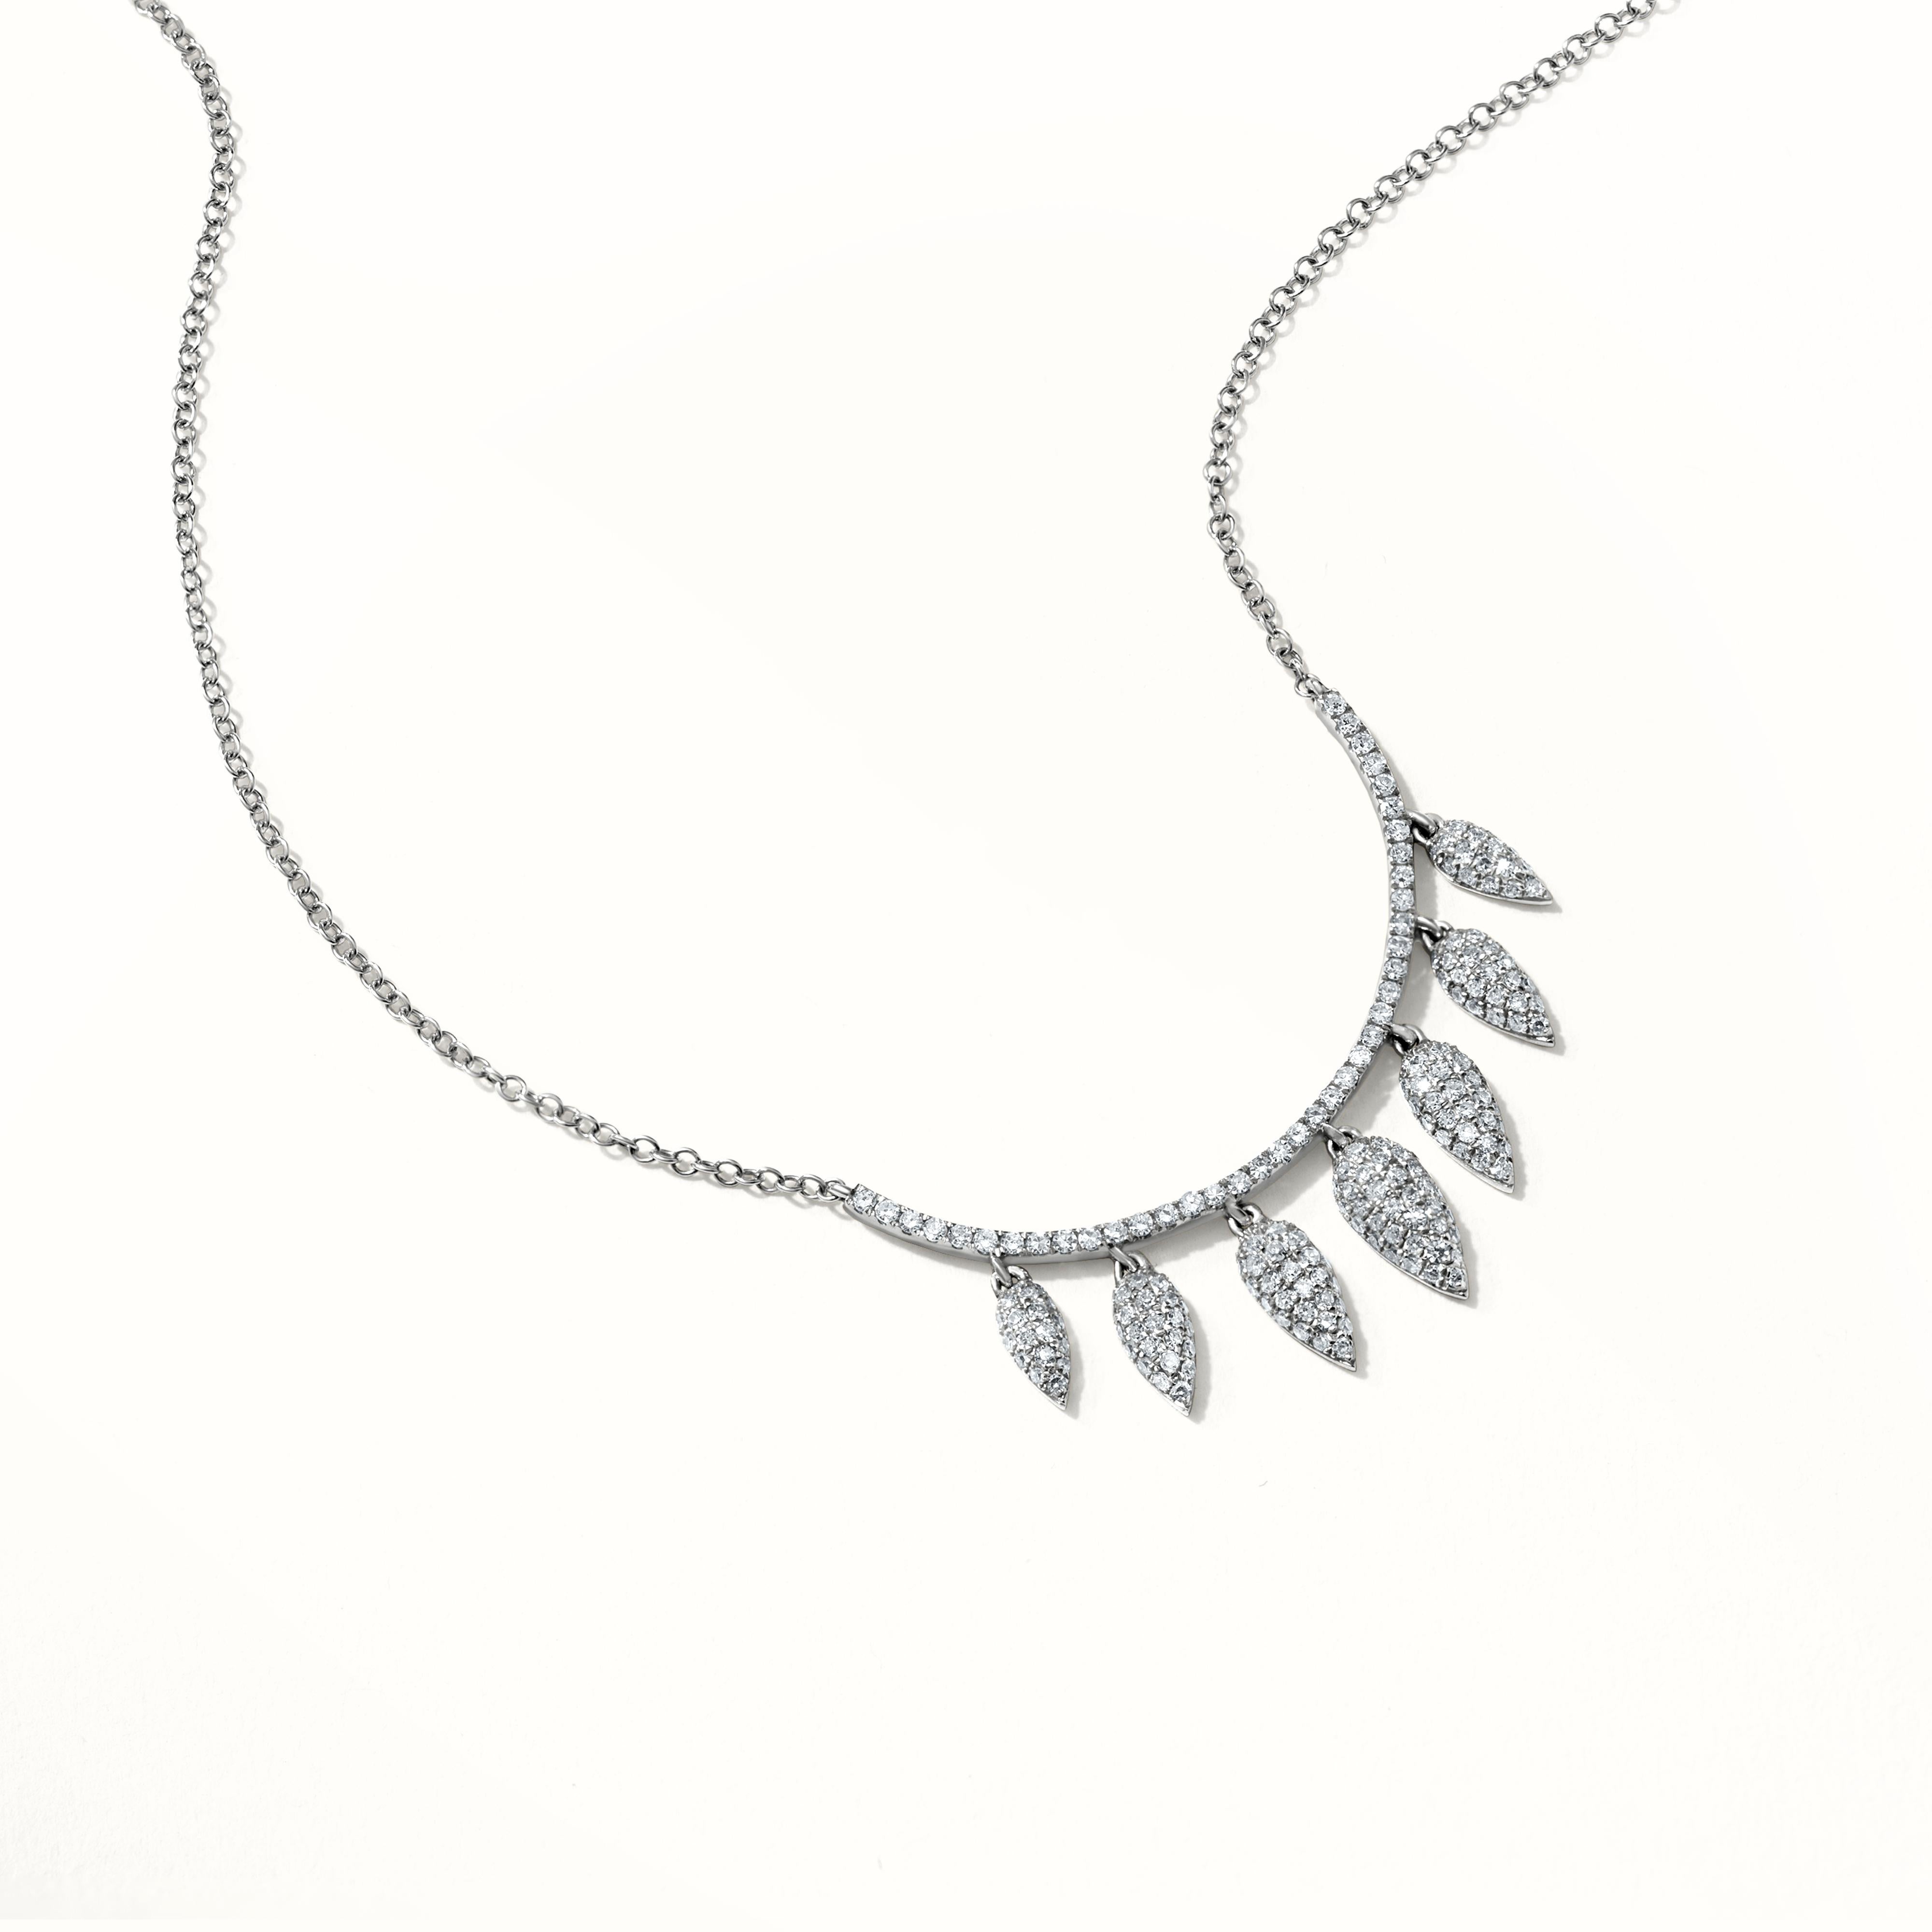 This magnificent Luxle leaf pendant necklace is made in 14K White Gold and sways with grace. The leaf patterns are encrusted with 0.56 carats of round single-cut diamonds that flash with brilliance. This pendant necklace is understated but